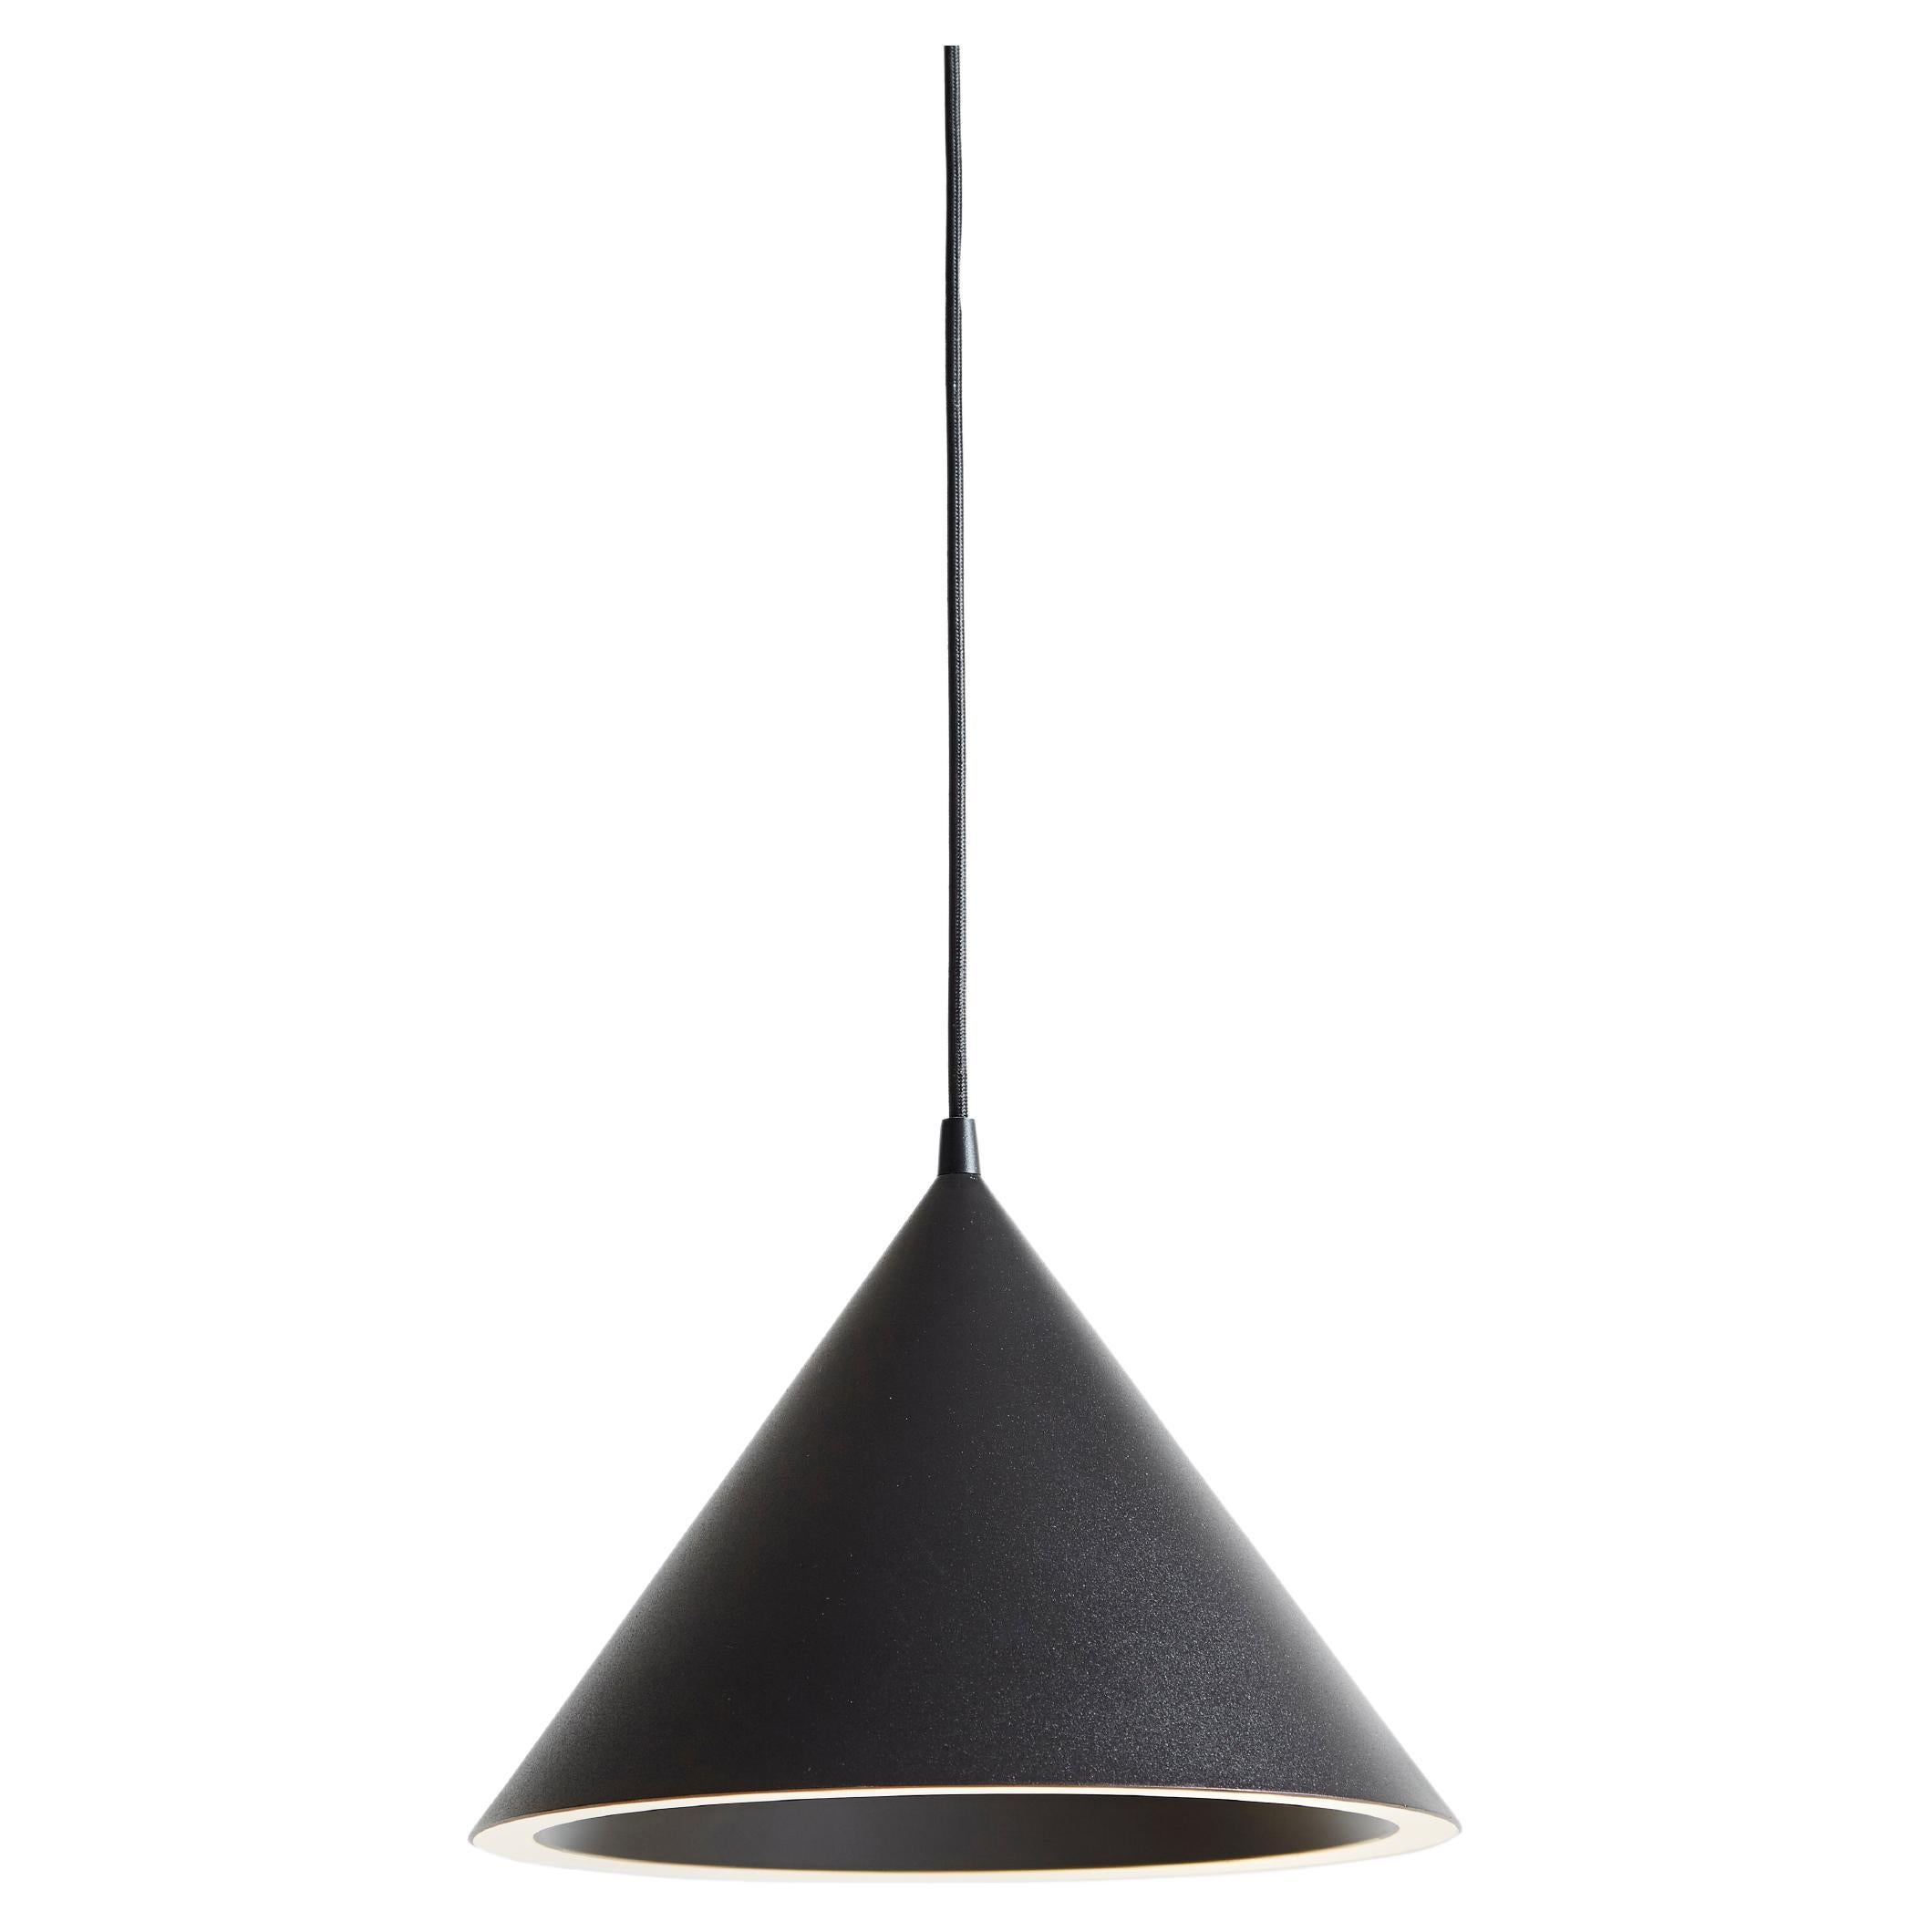 Small Black Annular Pendant Lamp by MSDS Studio